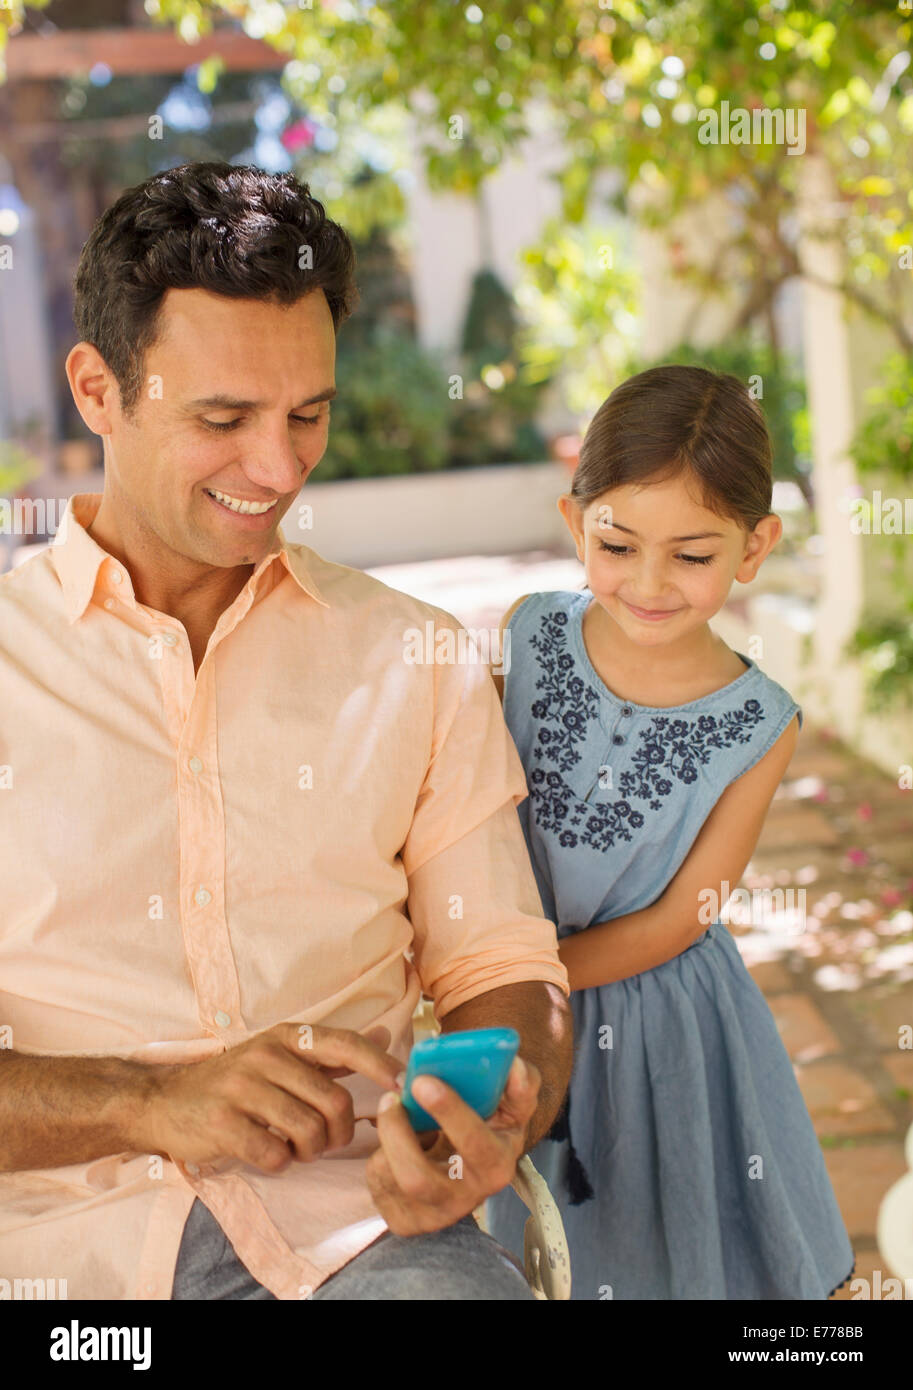 Father and daughter looking at cell phone Stock Photo